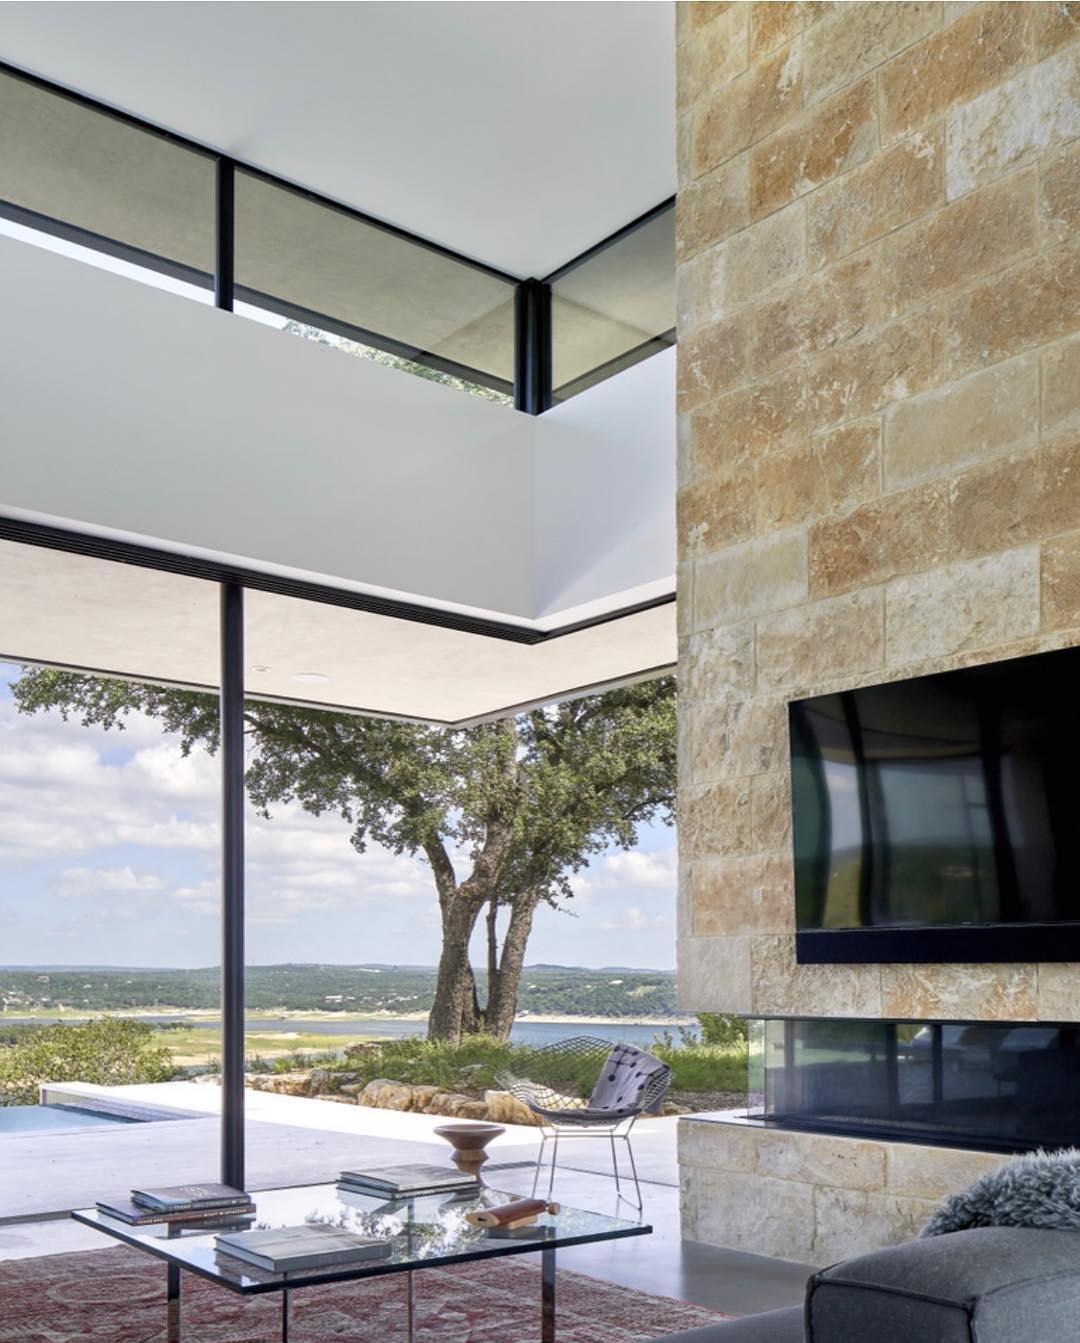 Our clients are loving their @dc_architecture home overlooking Lake Travis.